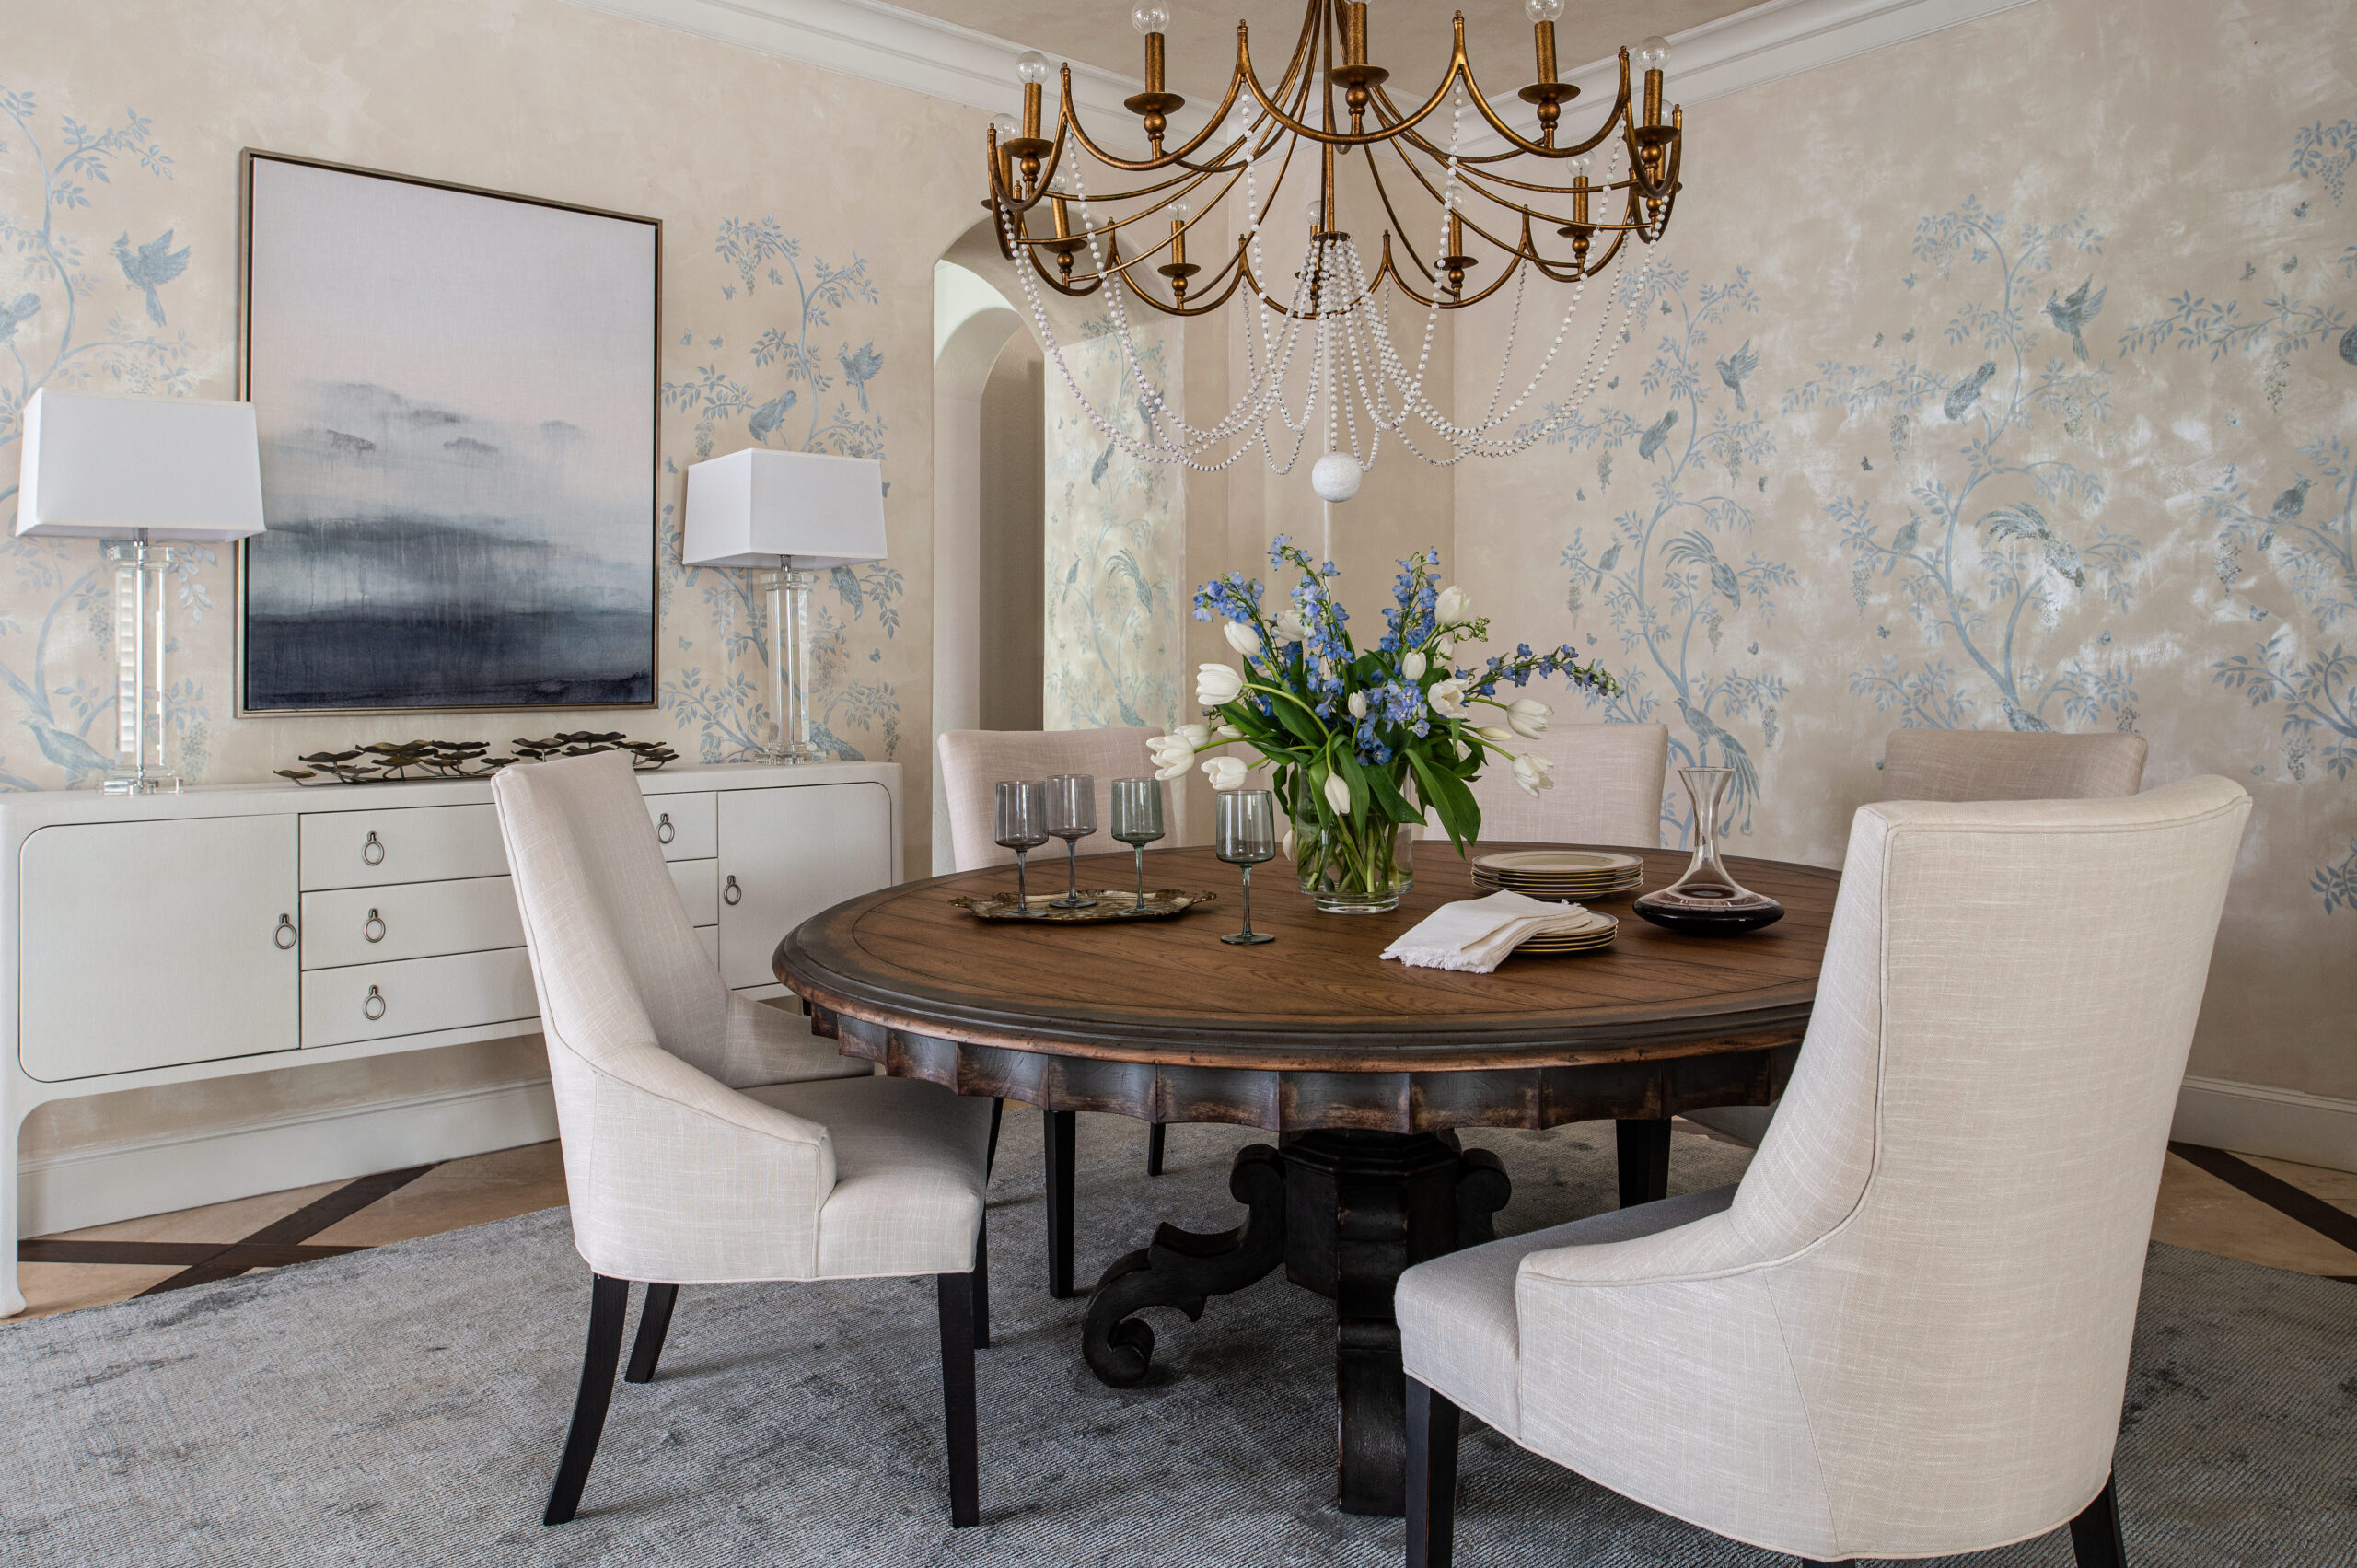 Beautiful interior design photos of a old-world style dining room with a stunning chandelier